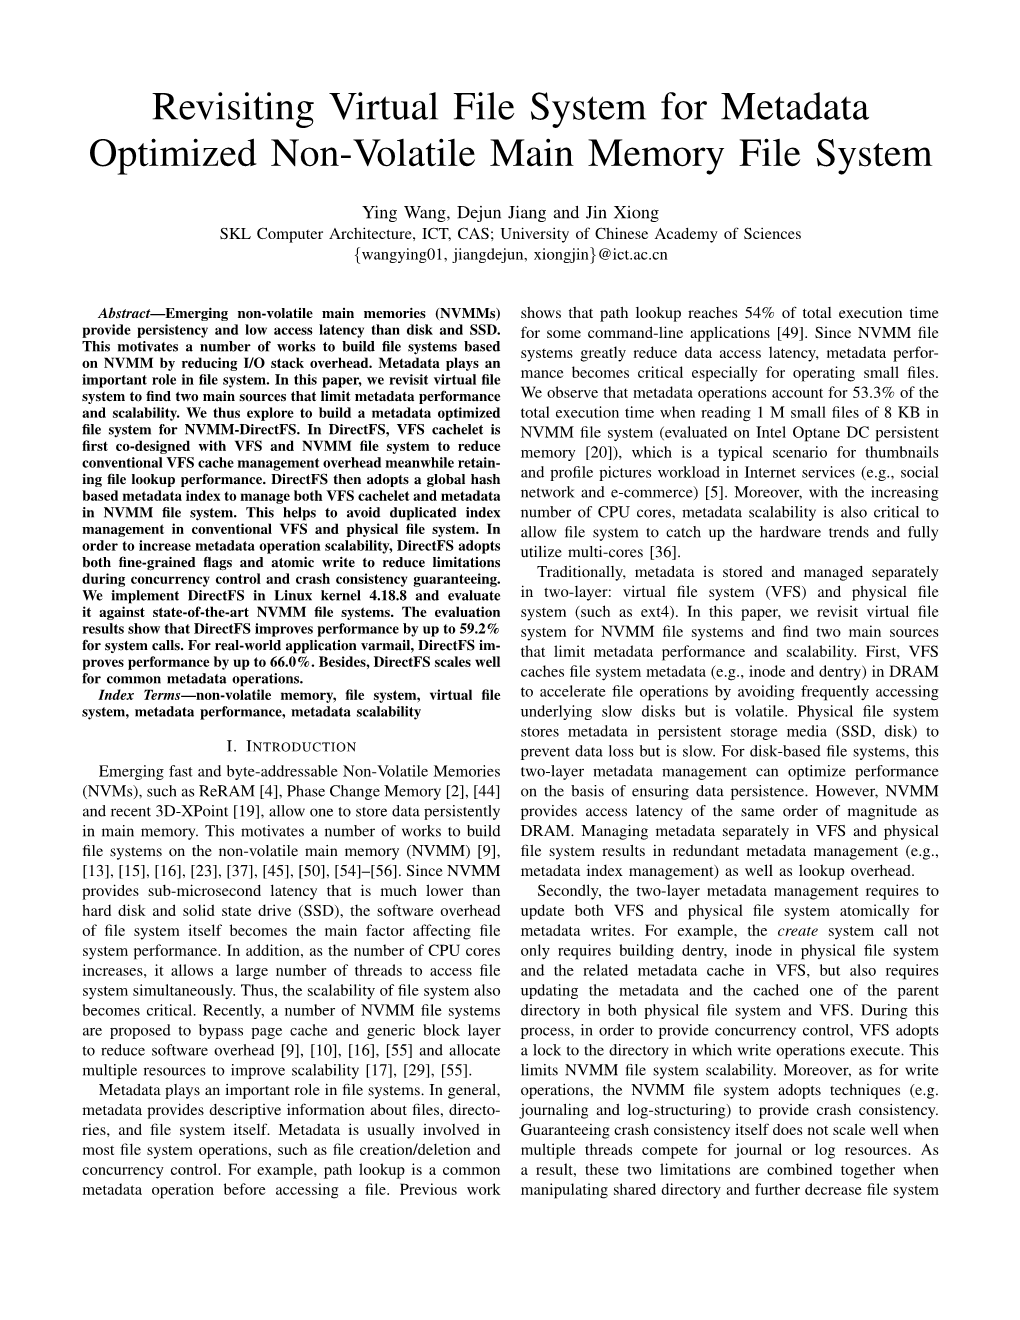 Revisiting Virtual File System for Metadata Optimized Non-Volatile Main Memory File System